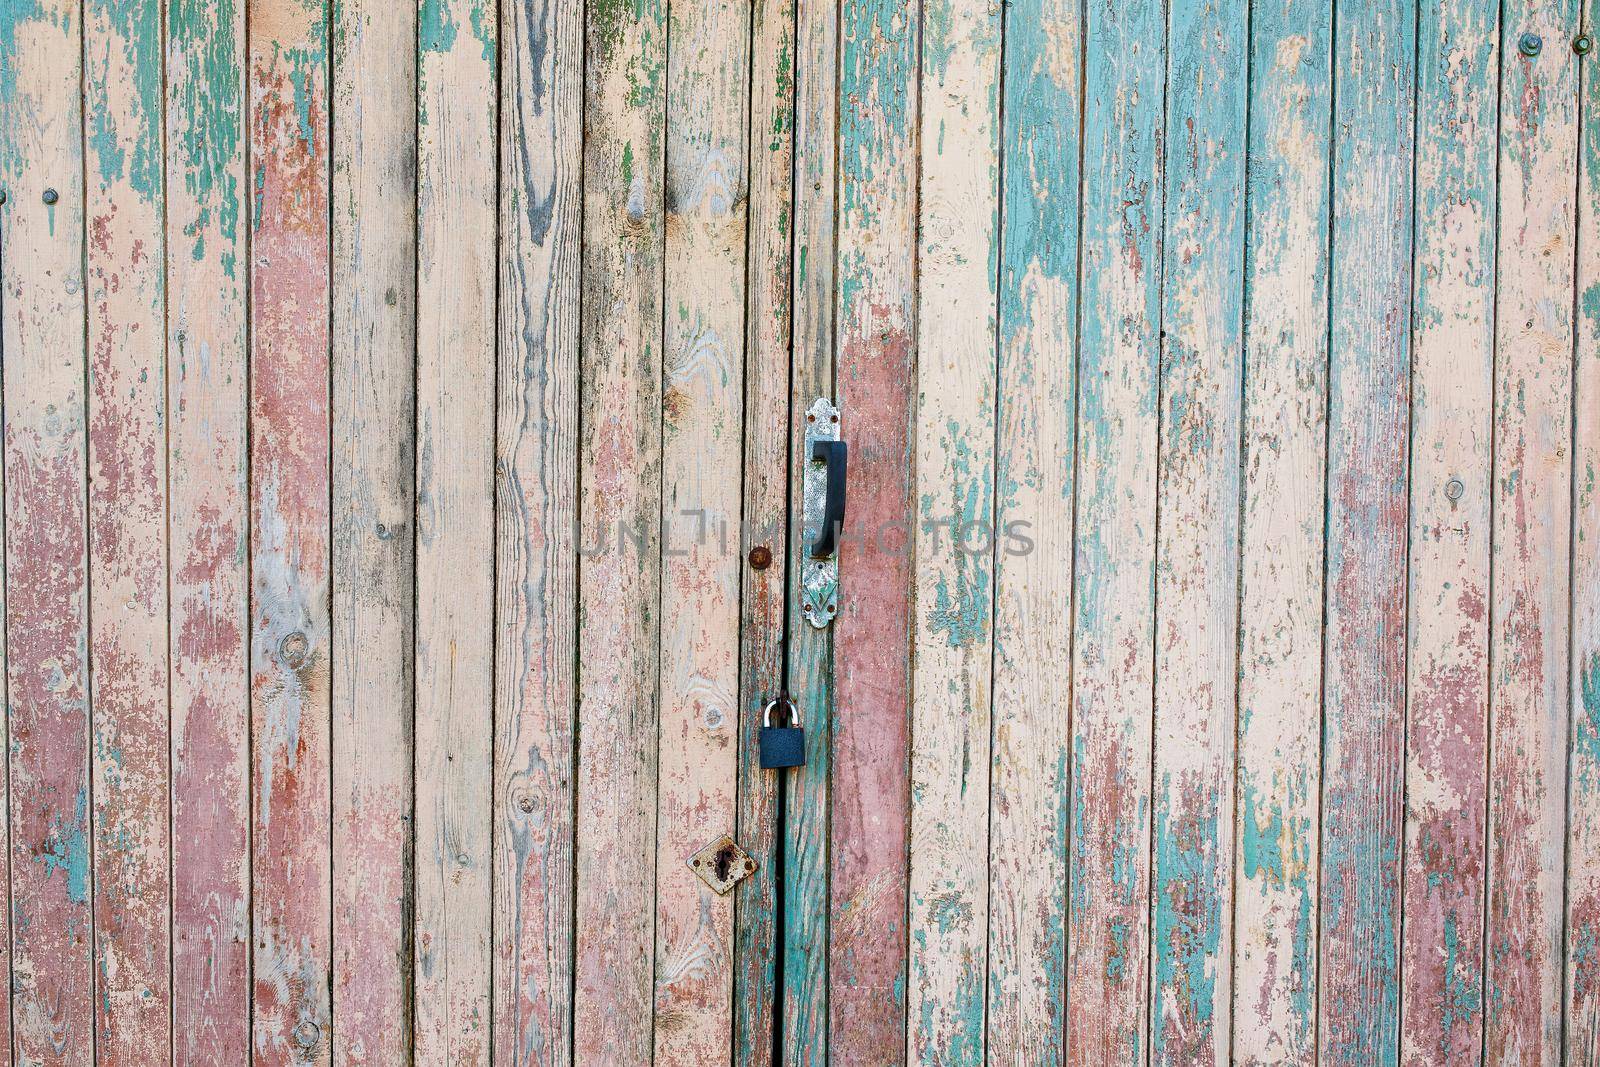 Fragment of the old and dilapidated doors. Wooden vertical texture of turquoise Colors, shabby wooden surface. Old texture for antique background Old texture for antique background